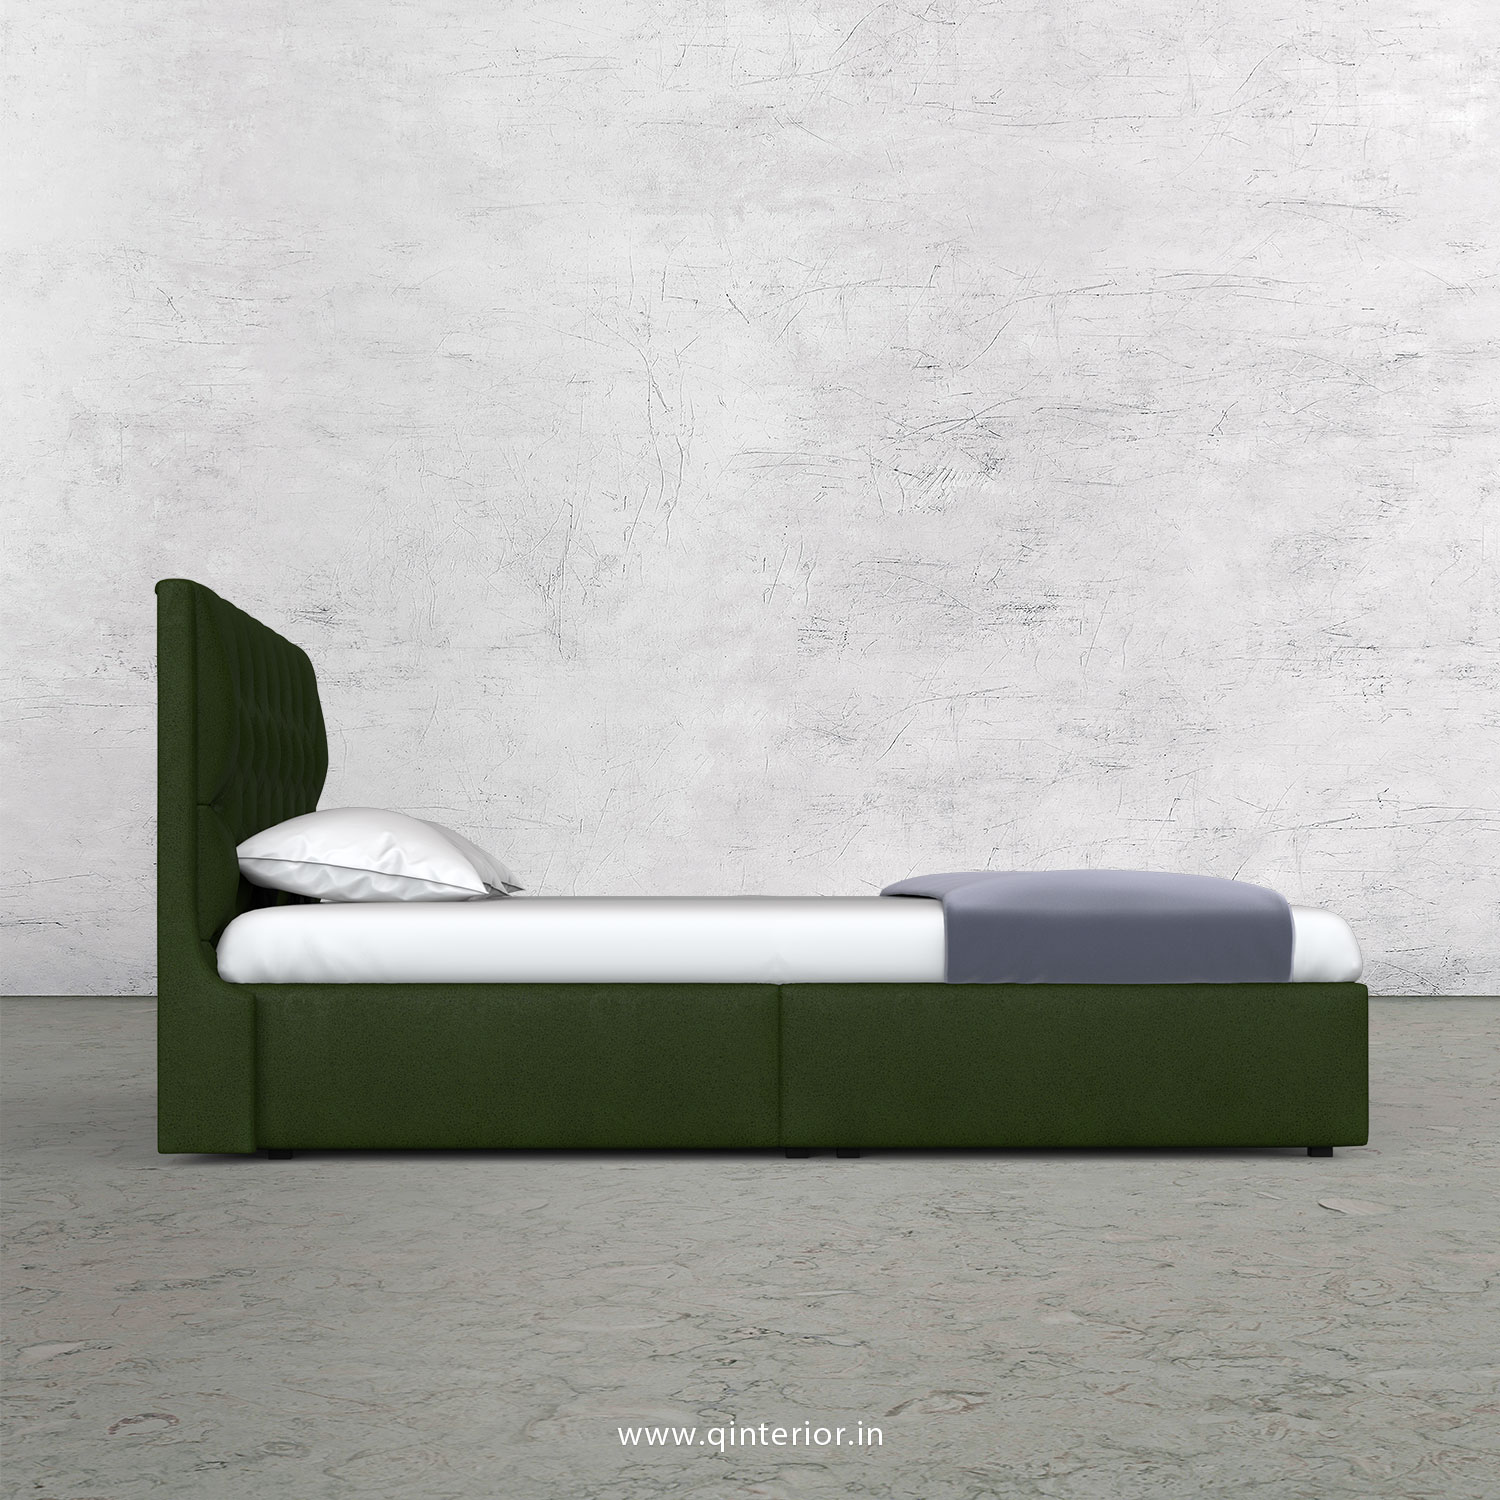 Scorpius King Size Bed in Fab Leather Fabric - KBD009 FL04